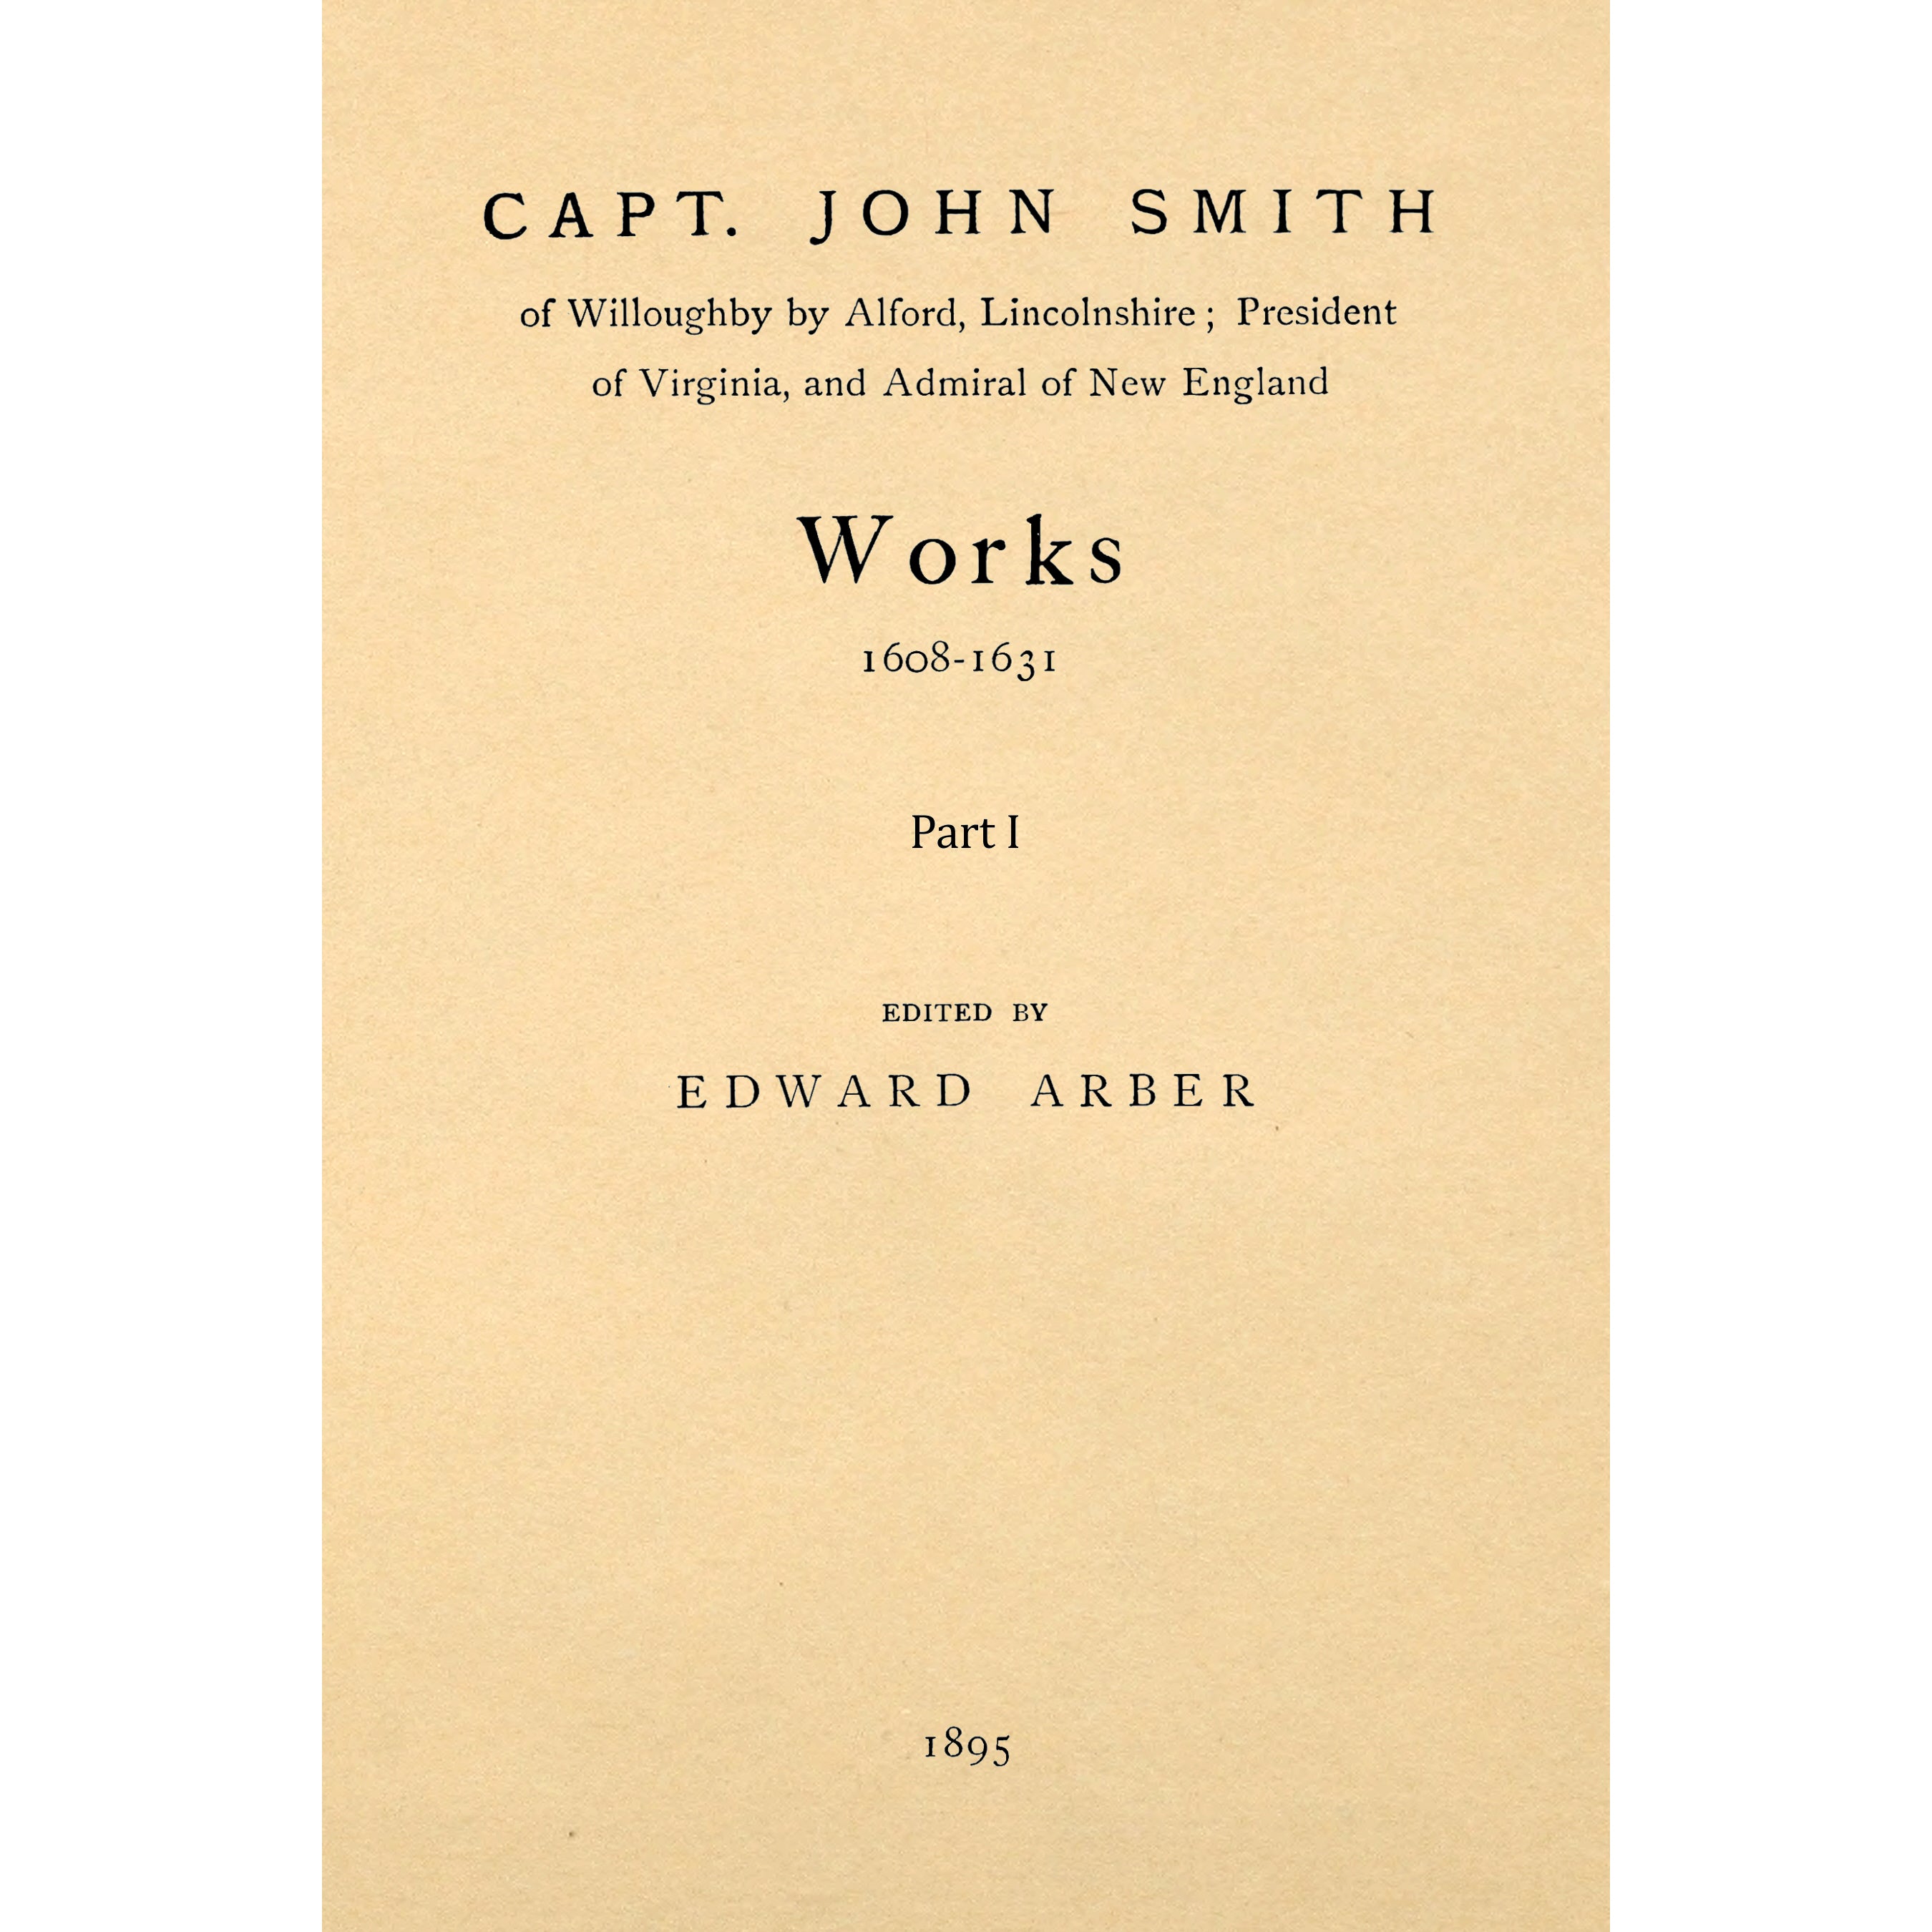 Capt. John Smith, of Willoughby  by Alford, Lincolnshire; 1608-1931 Two Volumes